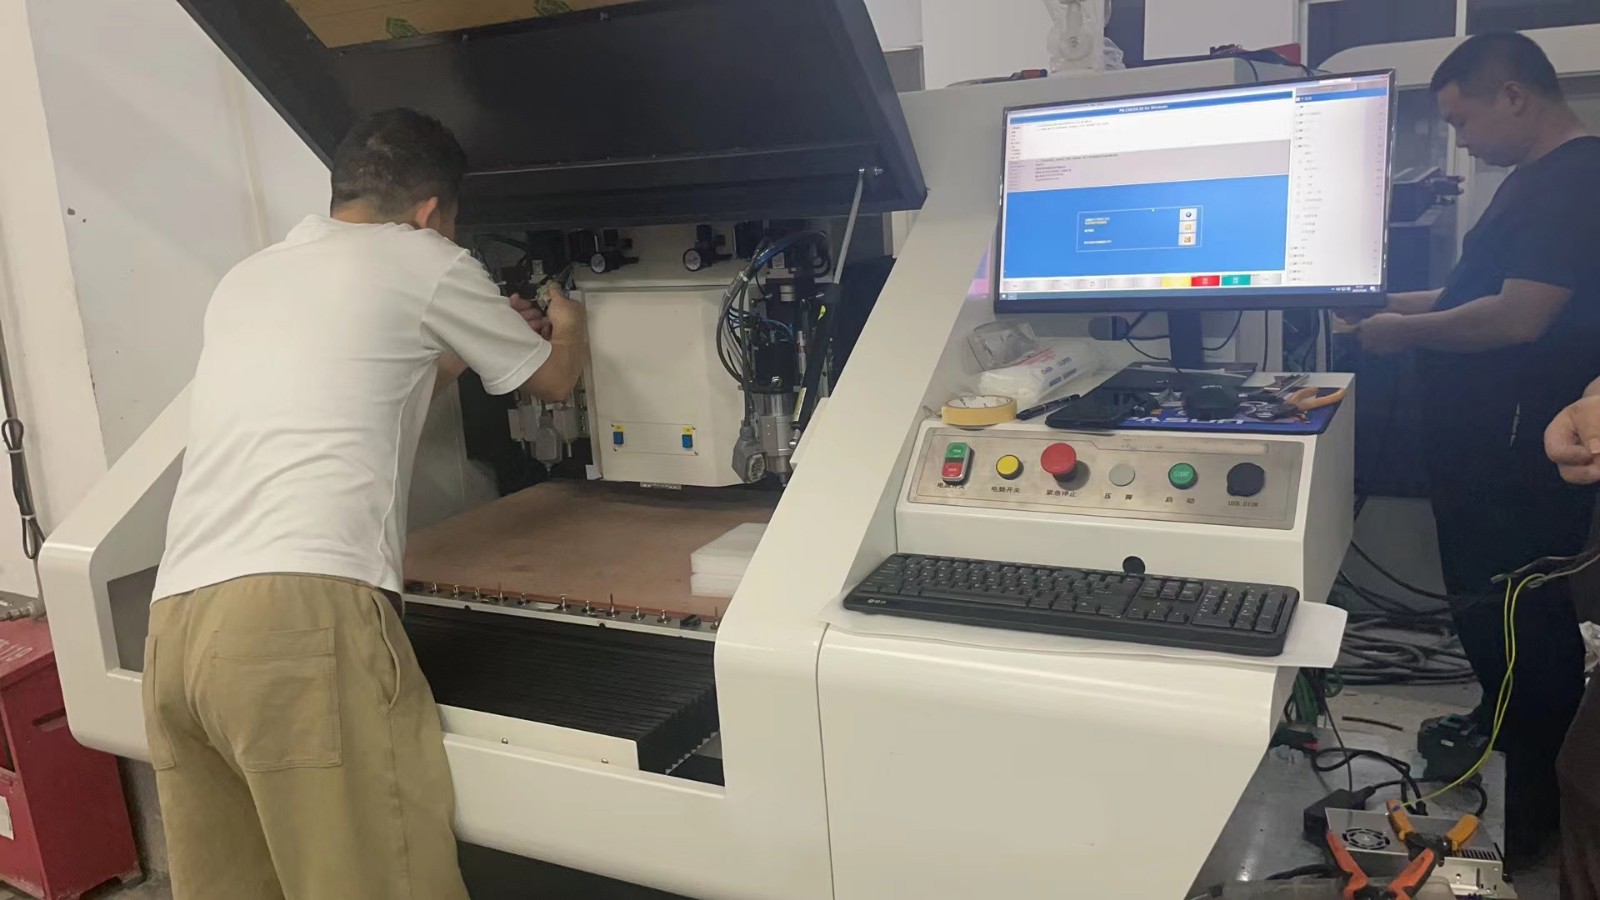 Auto Tool Change Spindle 1.2 KW Cheap PCB Milling Machine for Metal PCB, PCB Milling Machine Specification